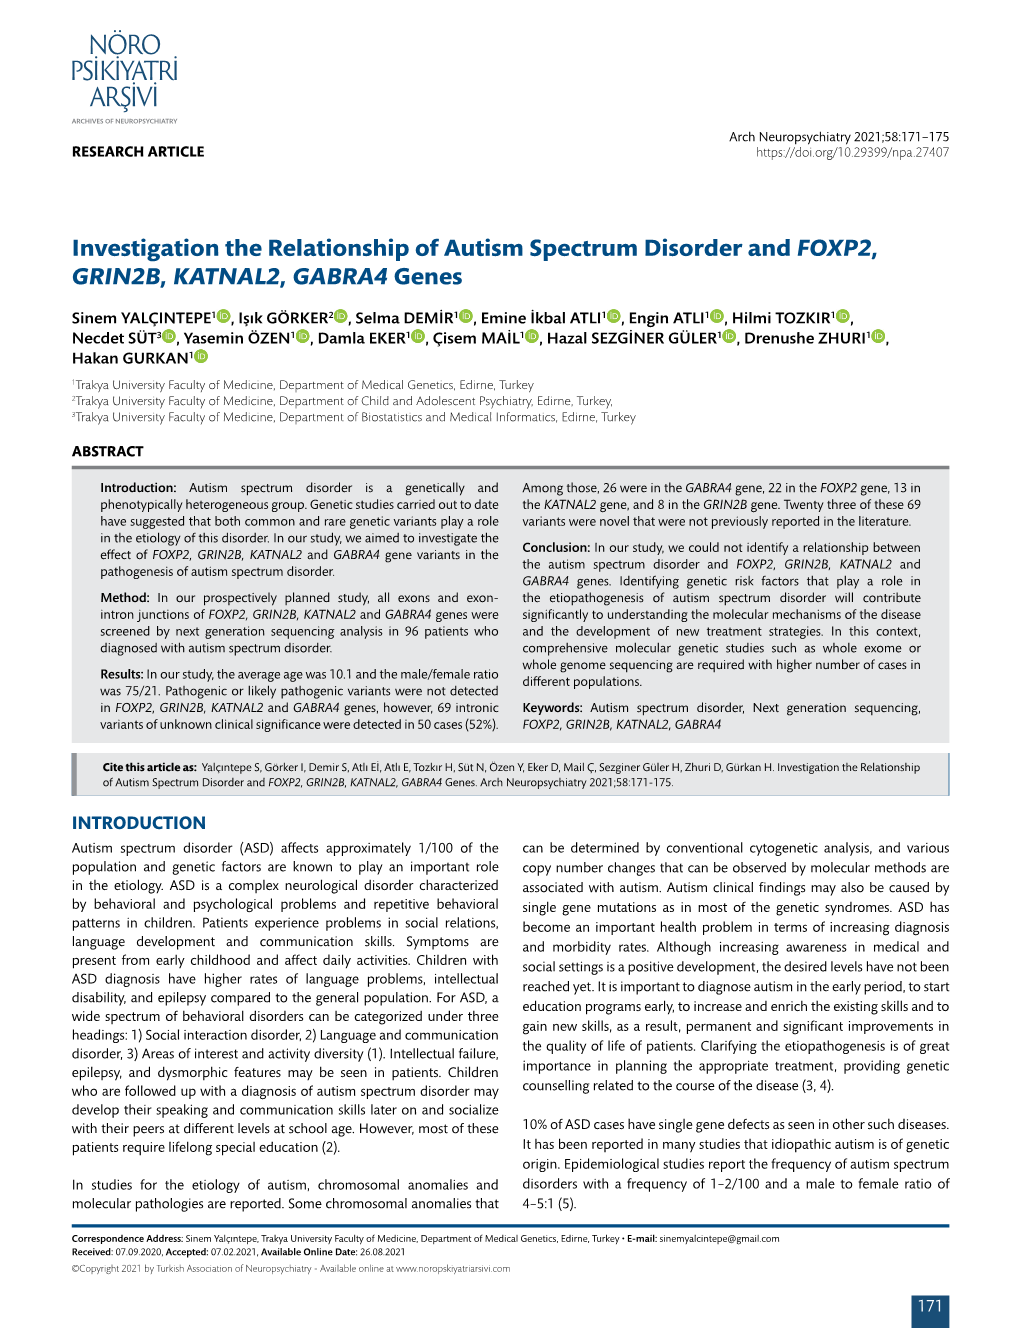 Investigation the Relationship of Autism Spectrum Disorder and FOXP2, GRIN2B, KATNAL2, GABRA4 Genes